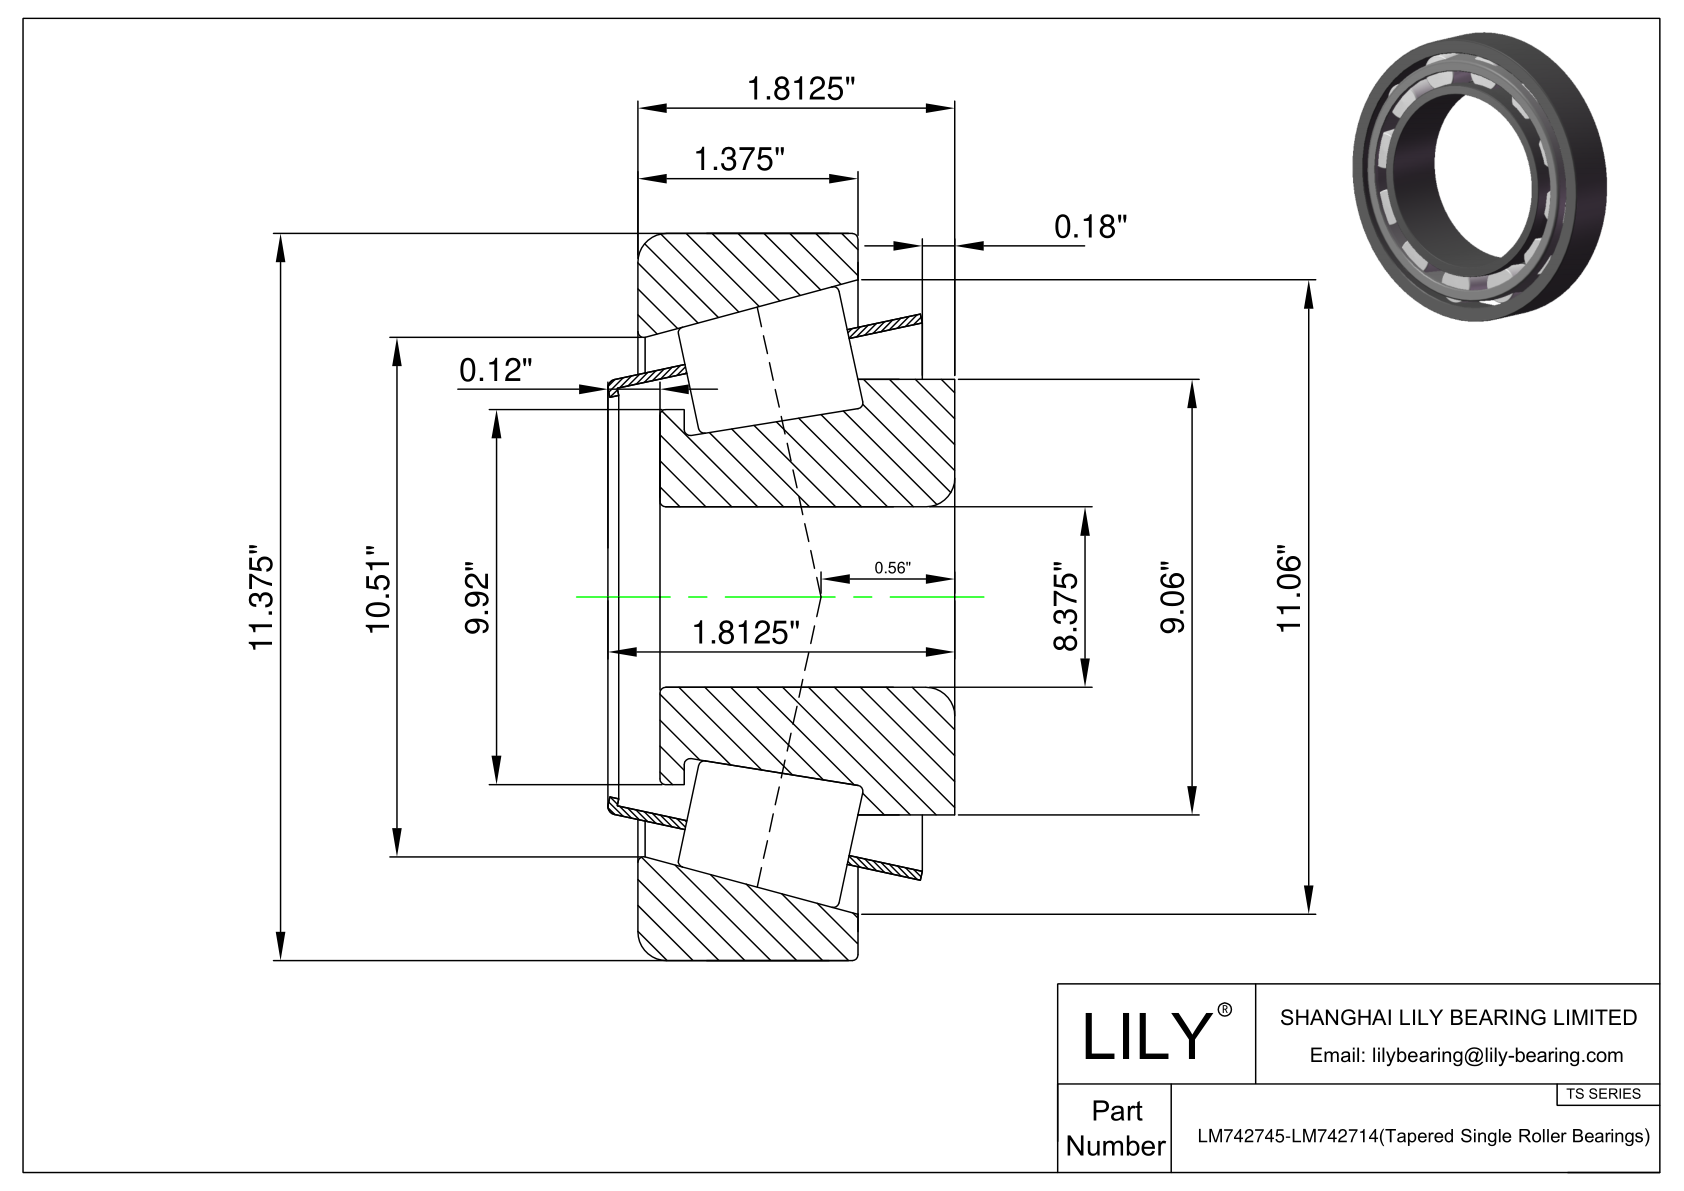 LM742745-LM742714 TS (Tapered Single Roller Bearings) (Imperial) cad drawing